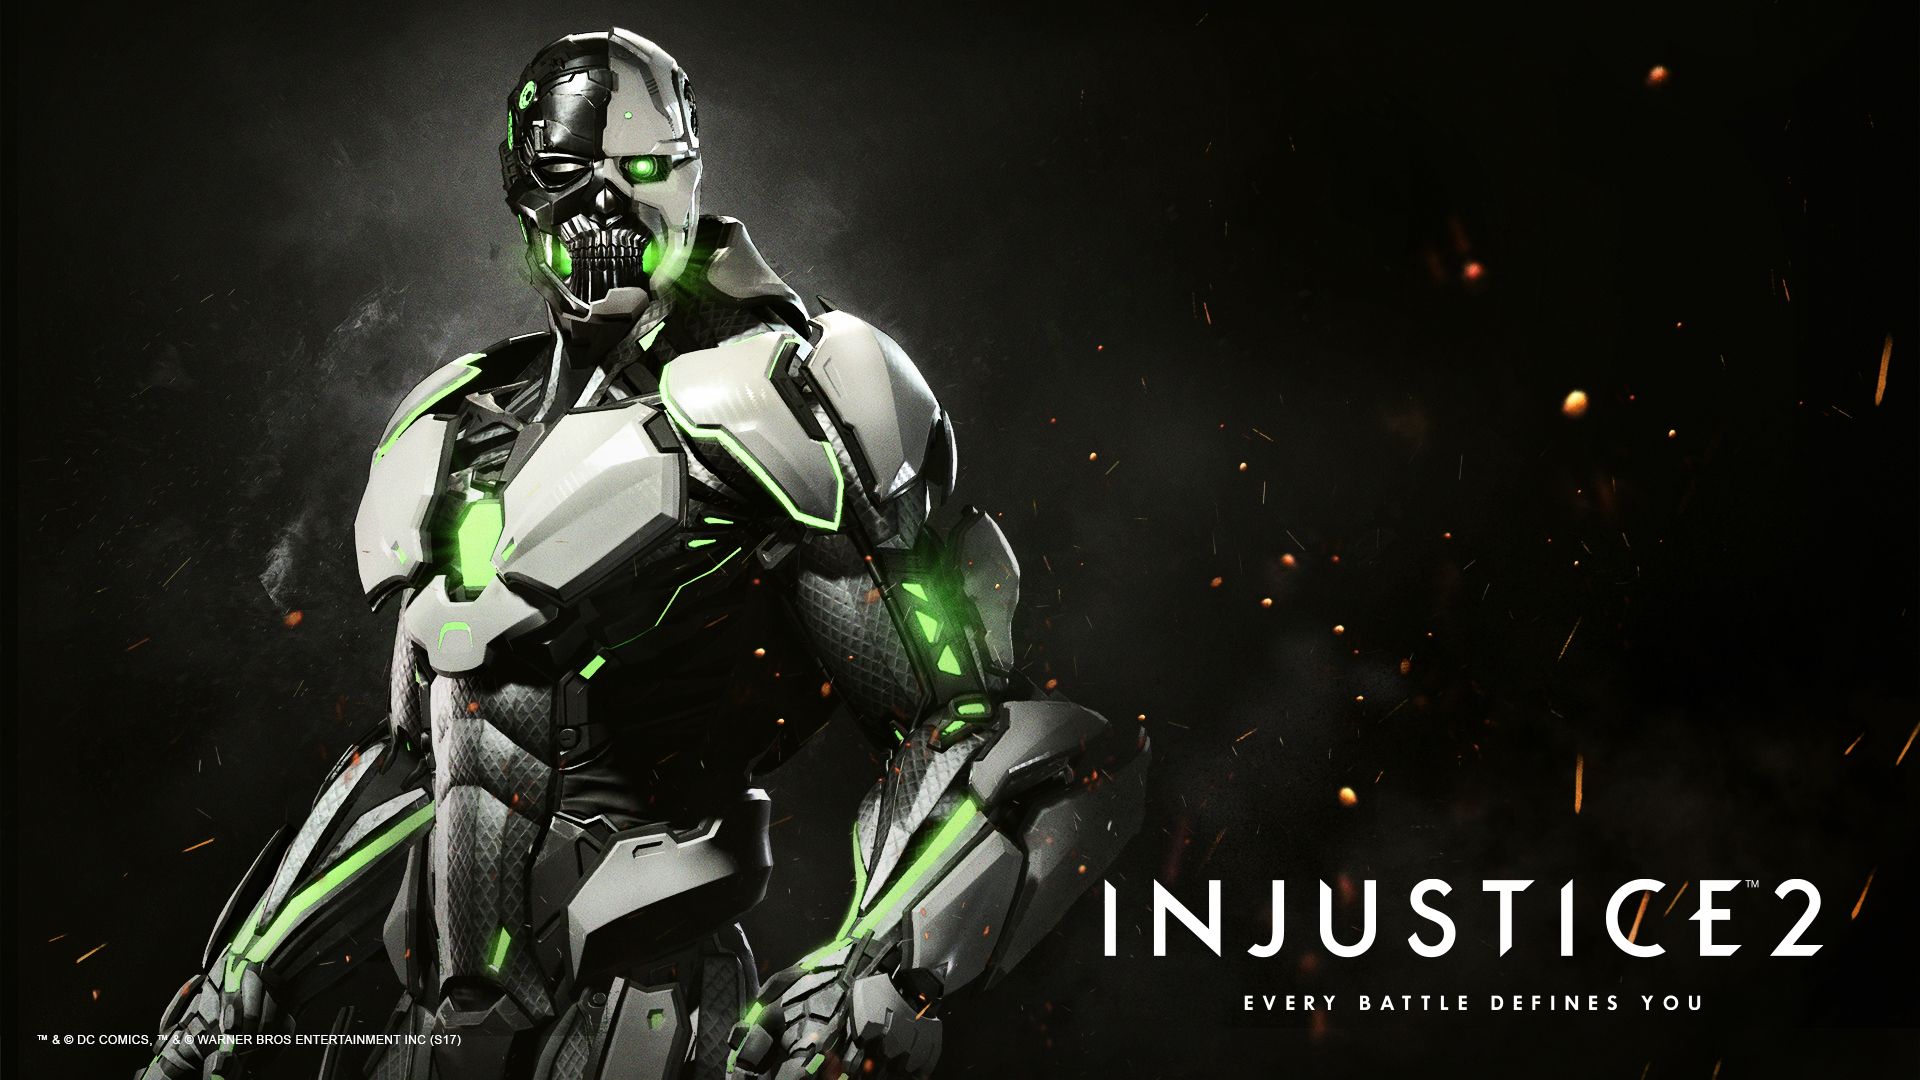 Wallpapers from Injustice 2